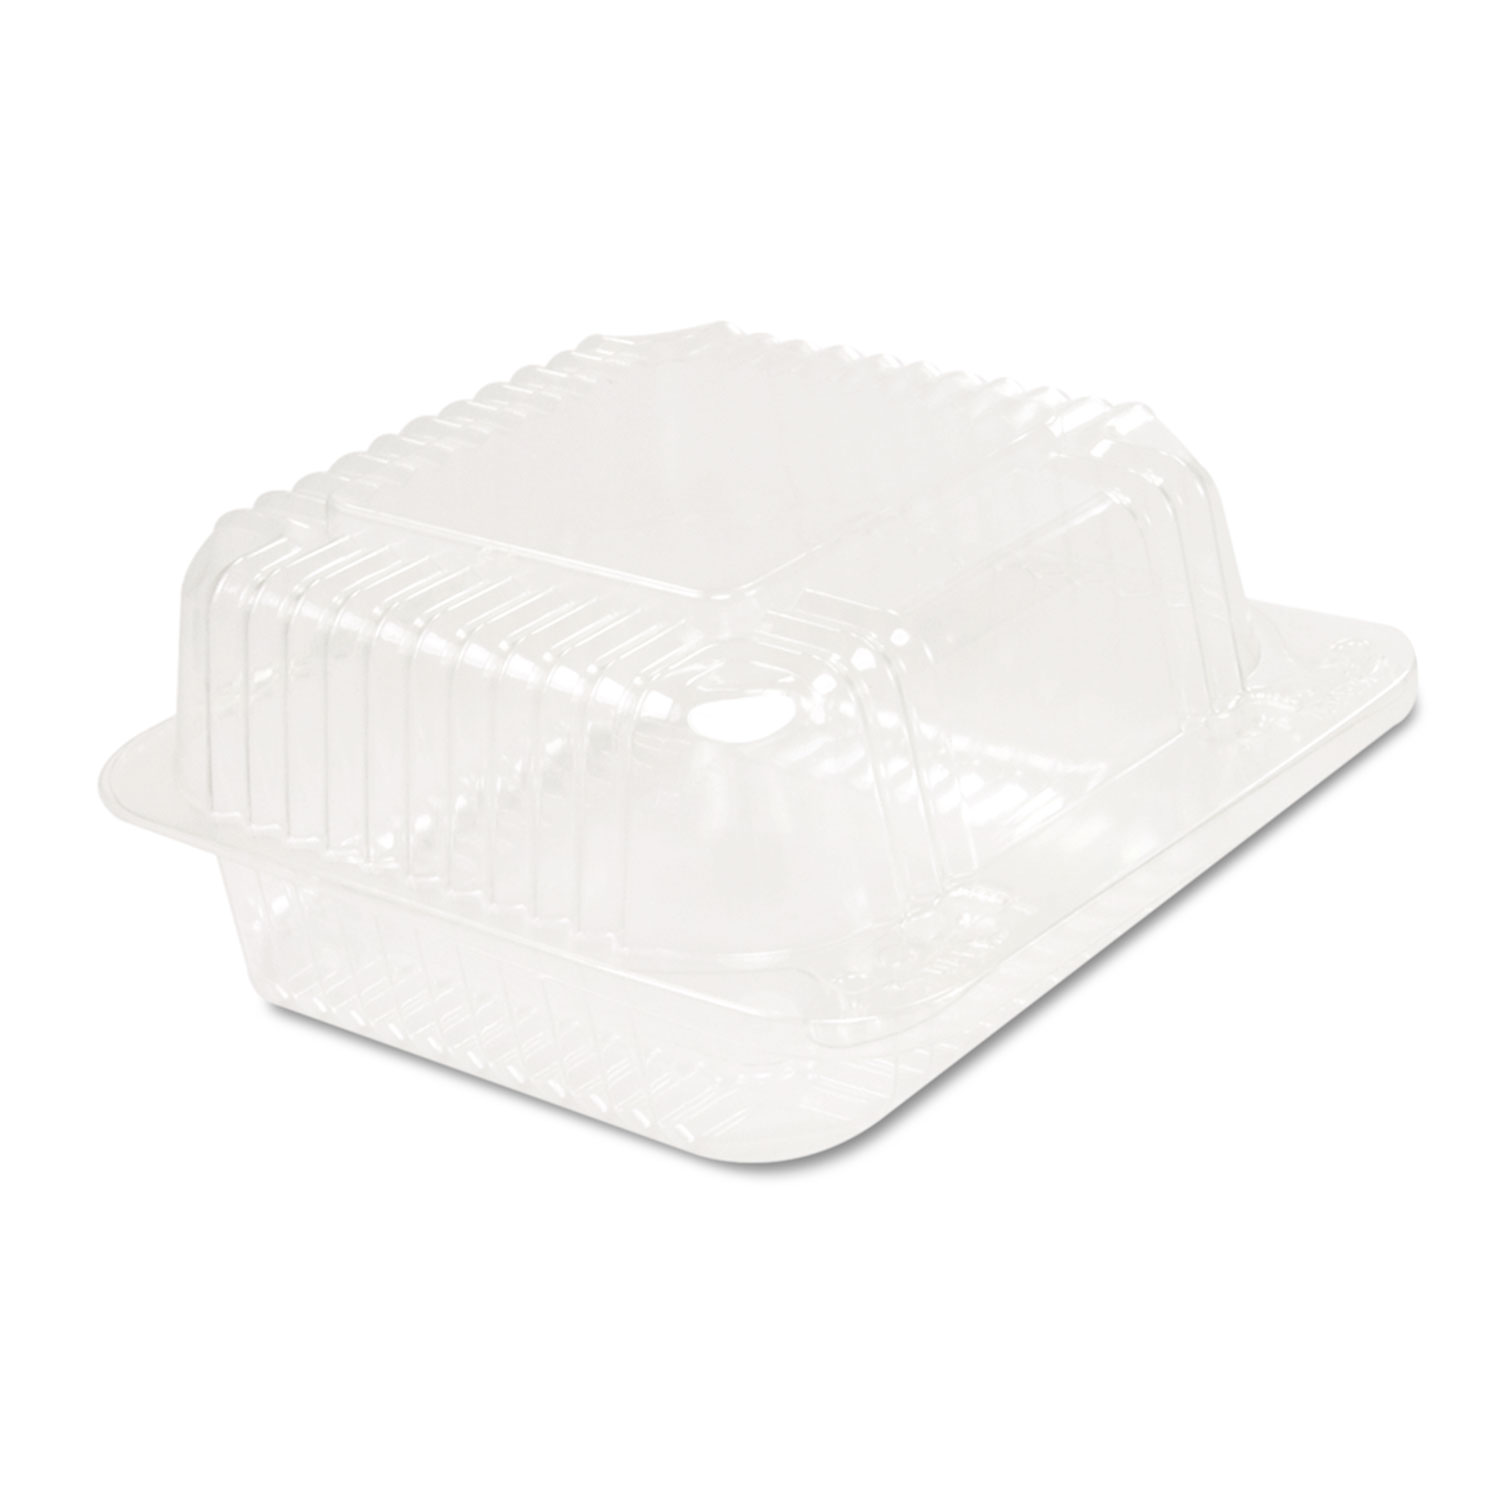 Staylock Clear Hinged Container, Plastic 5 3/10x5 3/5x2 4/5 Clear 125/BG 4 BG/CT